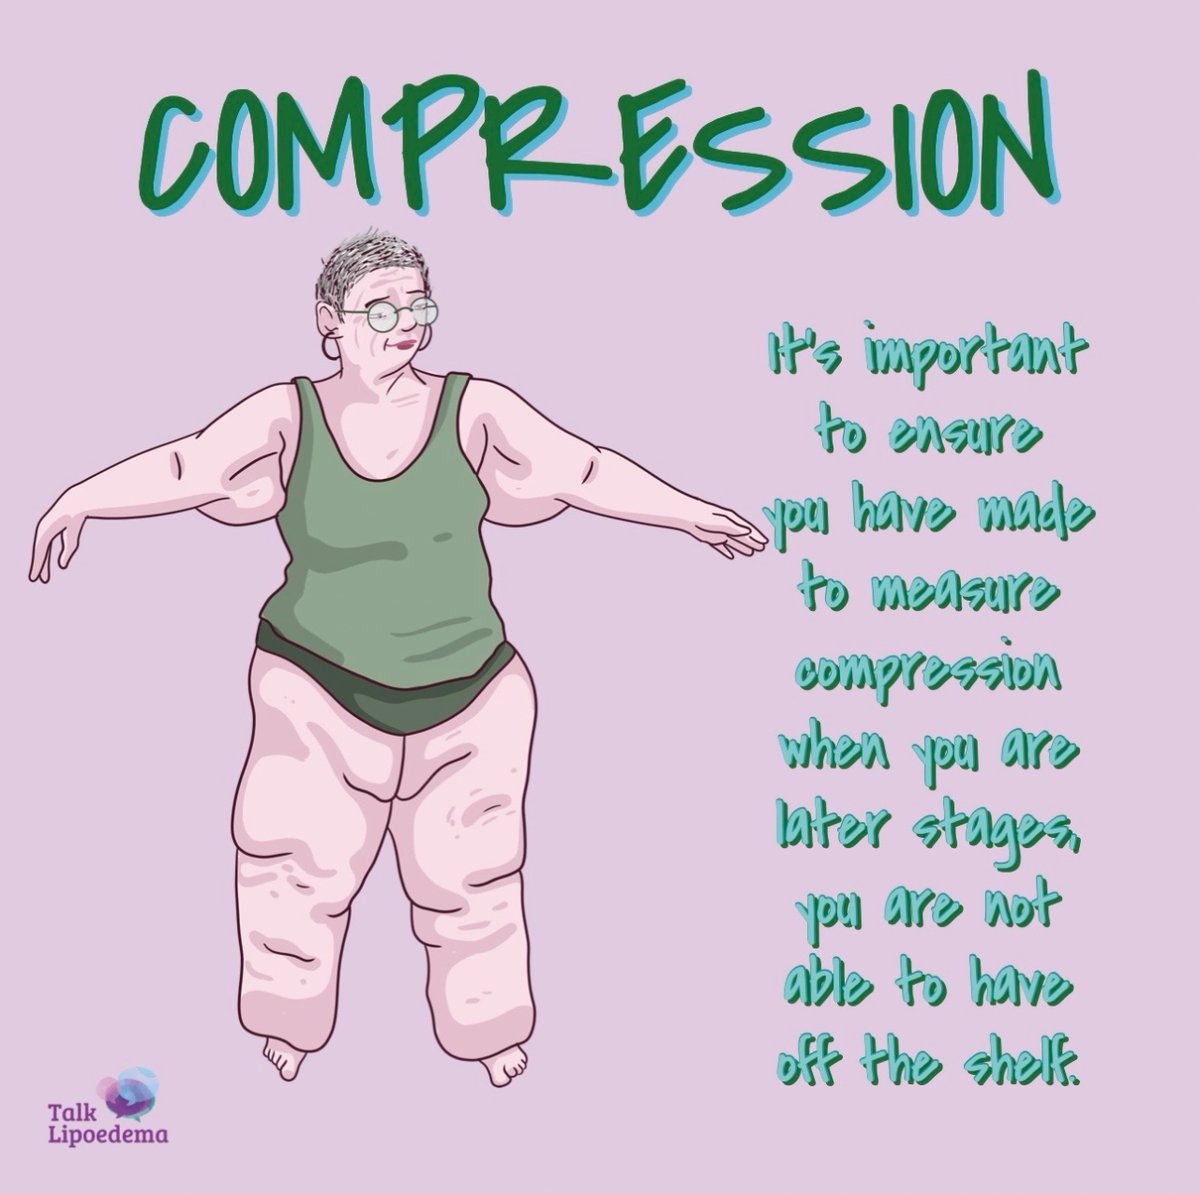 Being fitted for the correct compression in later stages is vital. Poorly fitting compression can do more harm than good. Ensure your measured by your clinic or MLD therapist #talklipoedema #laterstagecompression #lipoedemacompression #lipoedema #lipedema #compressionforlipoedema